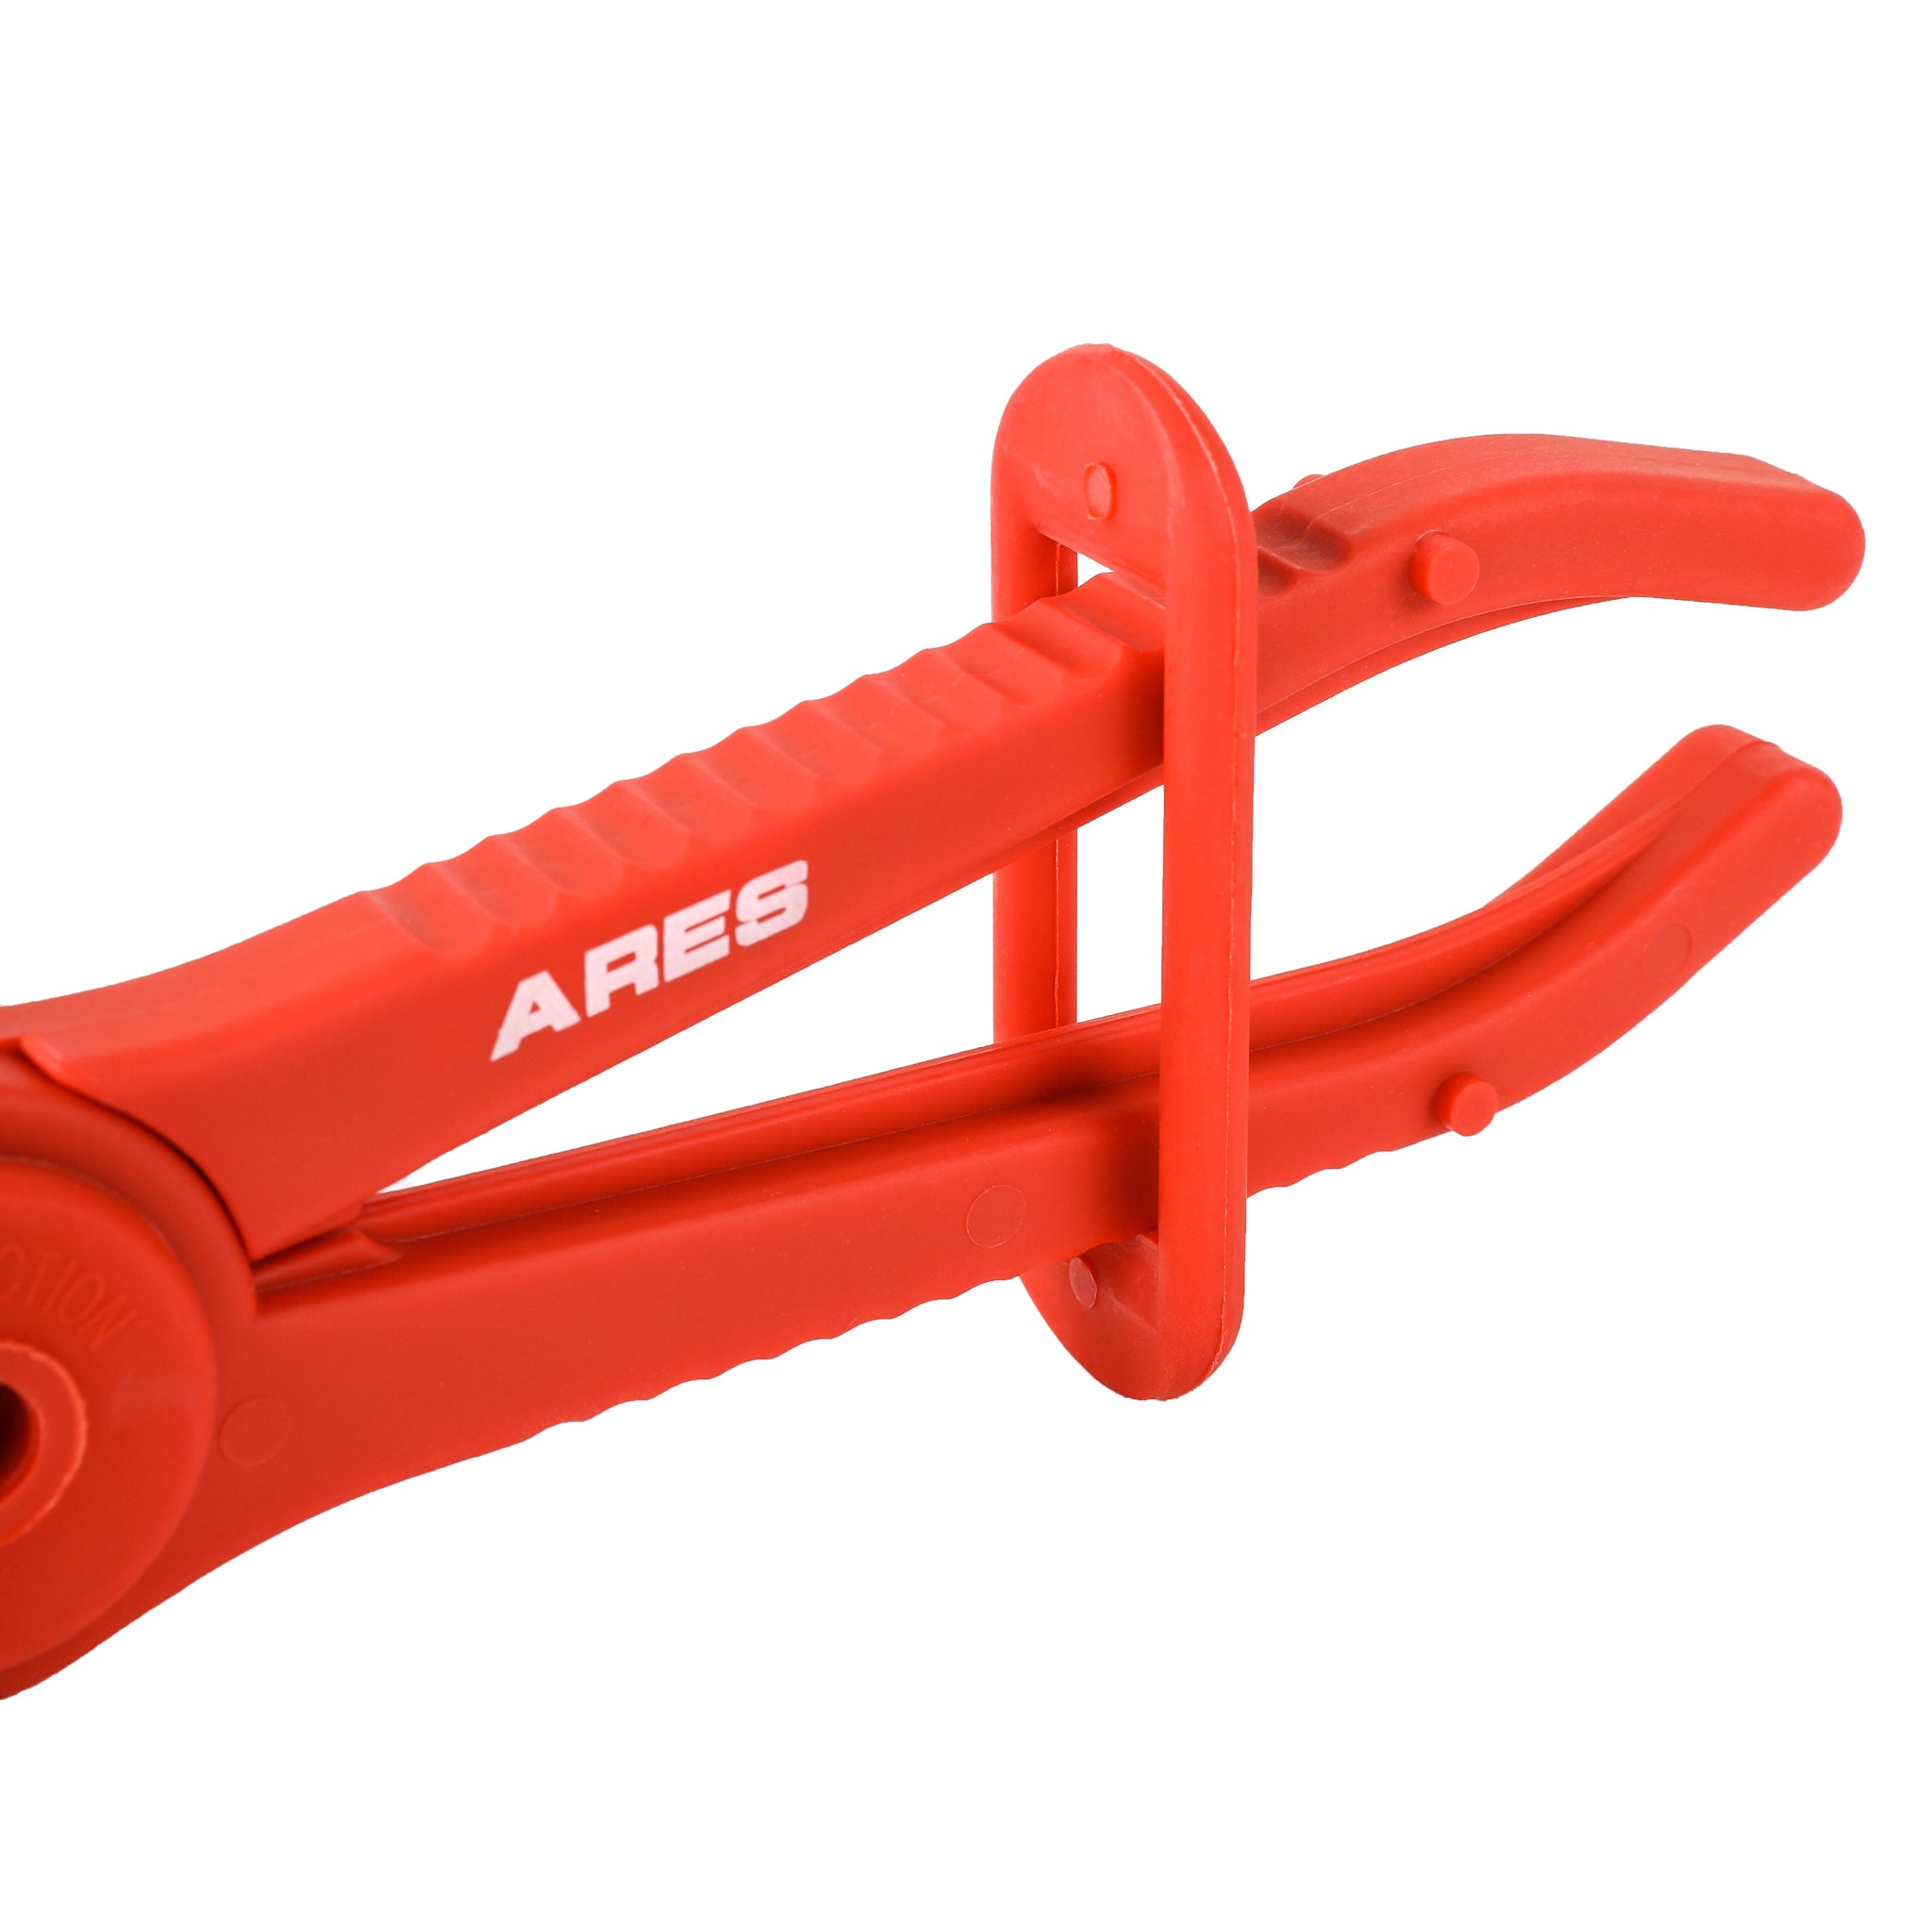 ARES 71024 - 12-Inch Ratcheting Hose Pinch Pliers - 2-Inch Jaw Contact Area  - Serrated Metal Swivel